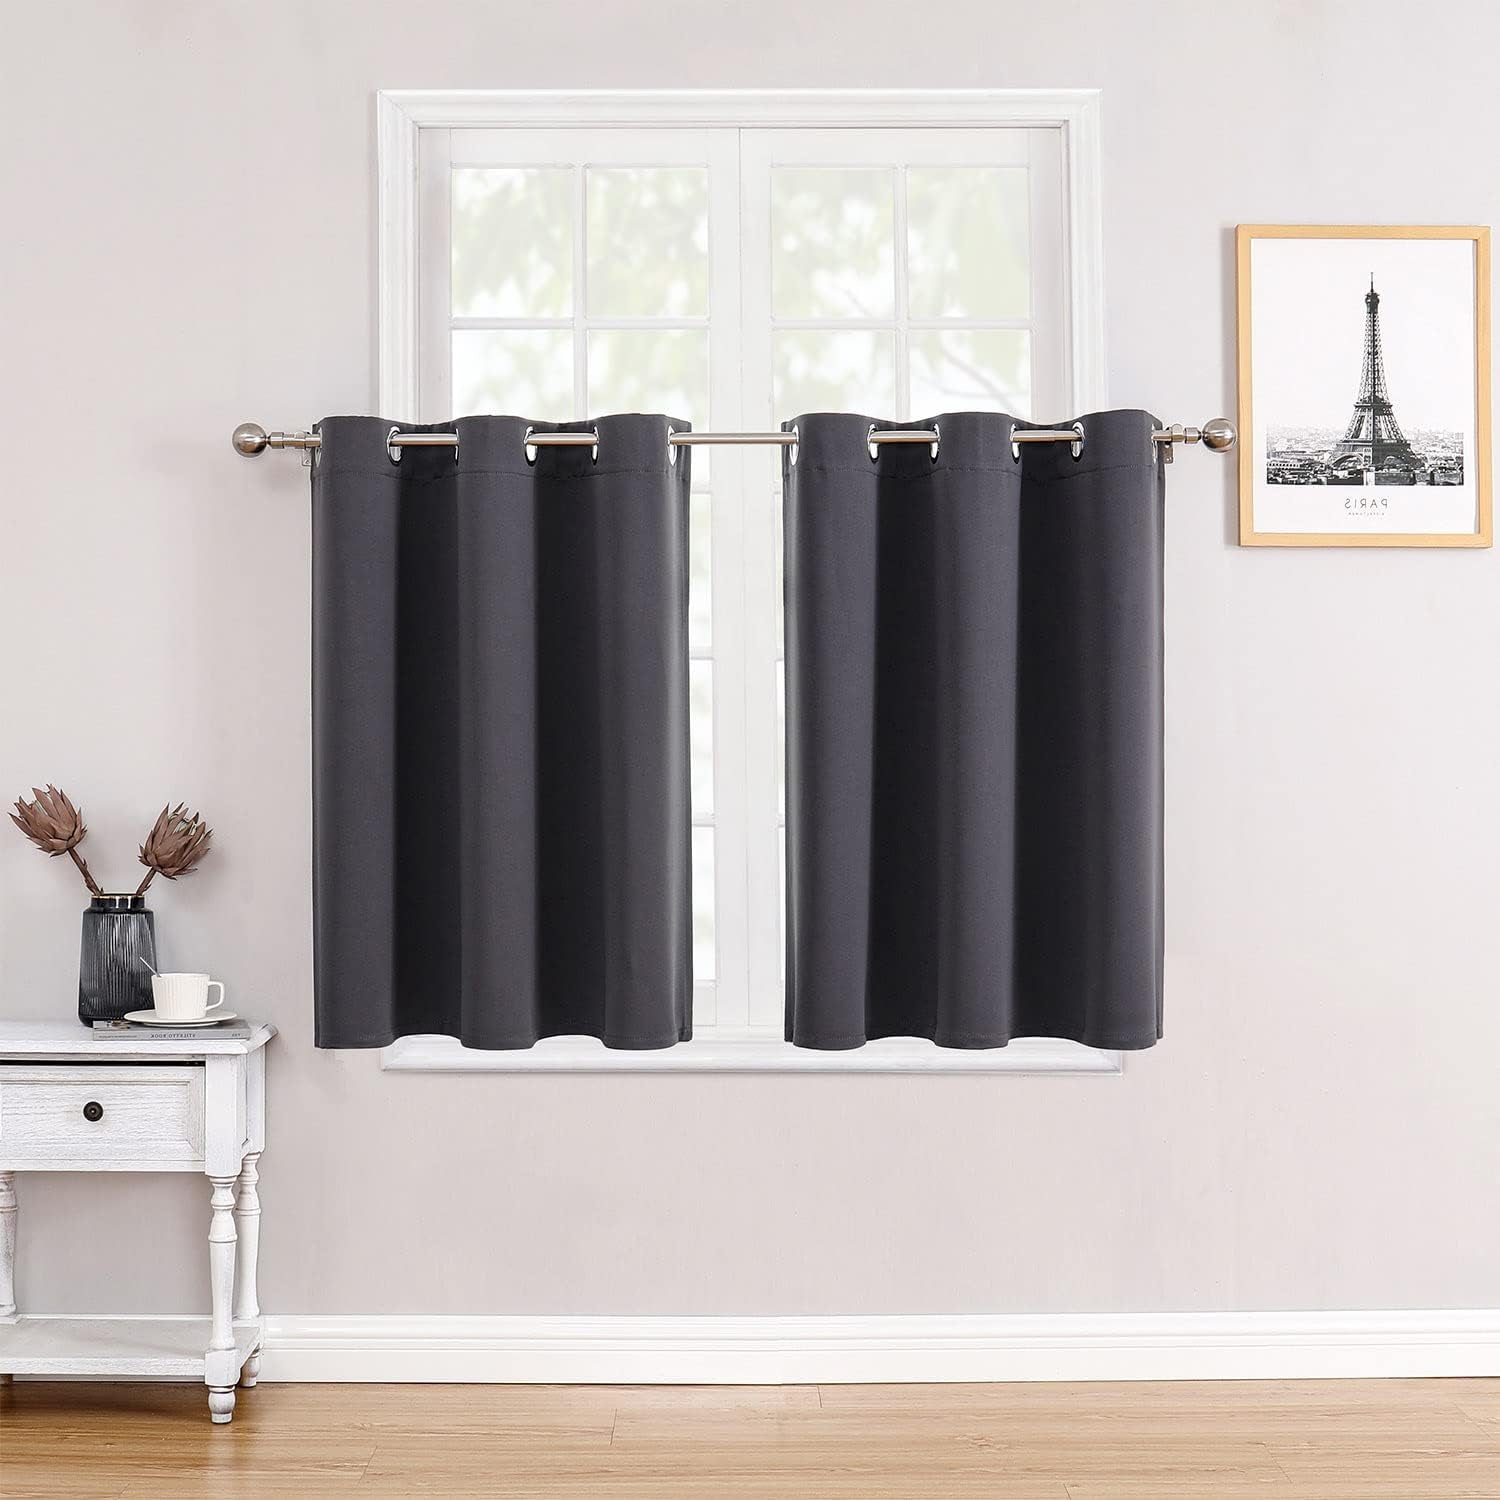 Small Window Curtains for Kitchen and Bedroom - Grommet Short Thermal Insulated Room Darkening Curtains (2 Panels, Dark Grey, 42 X 36 Inch)